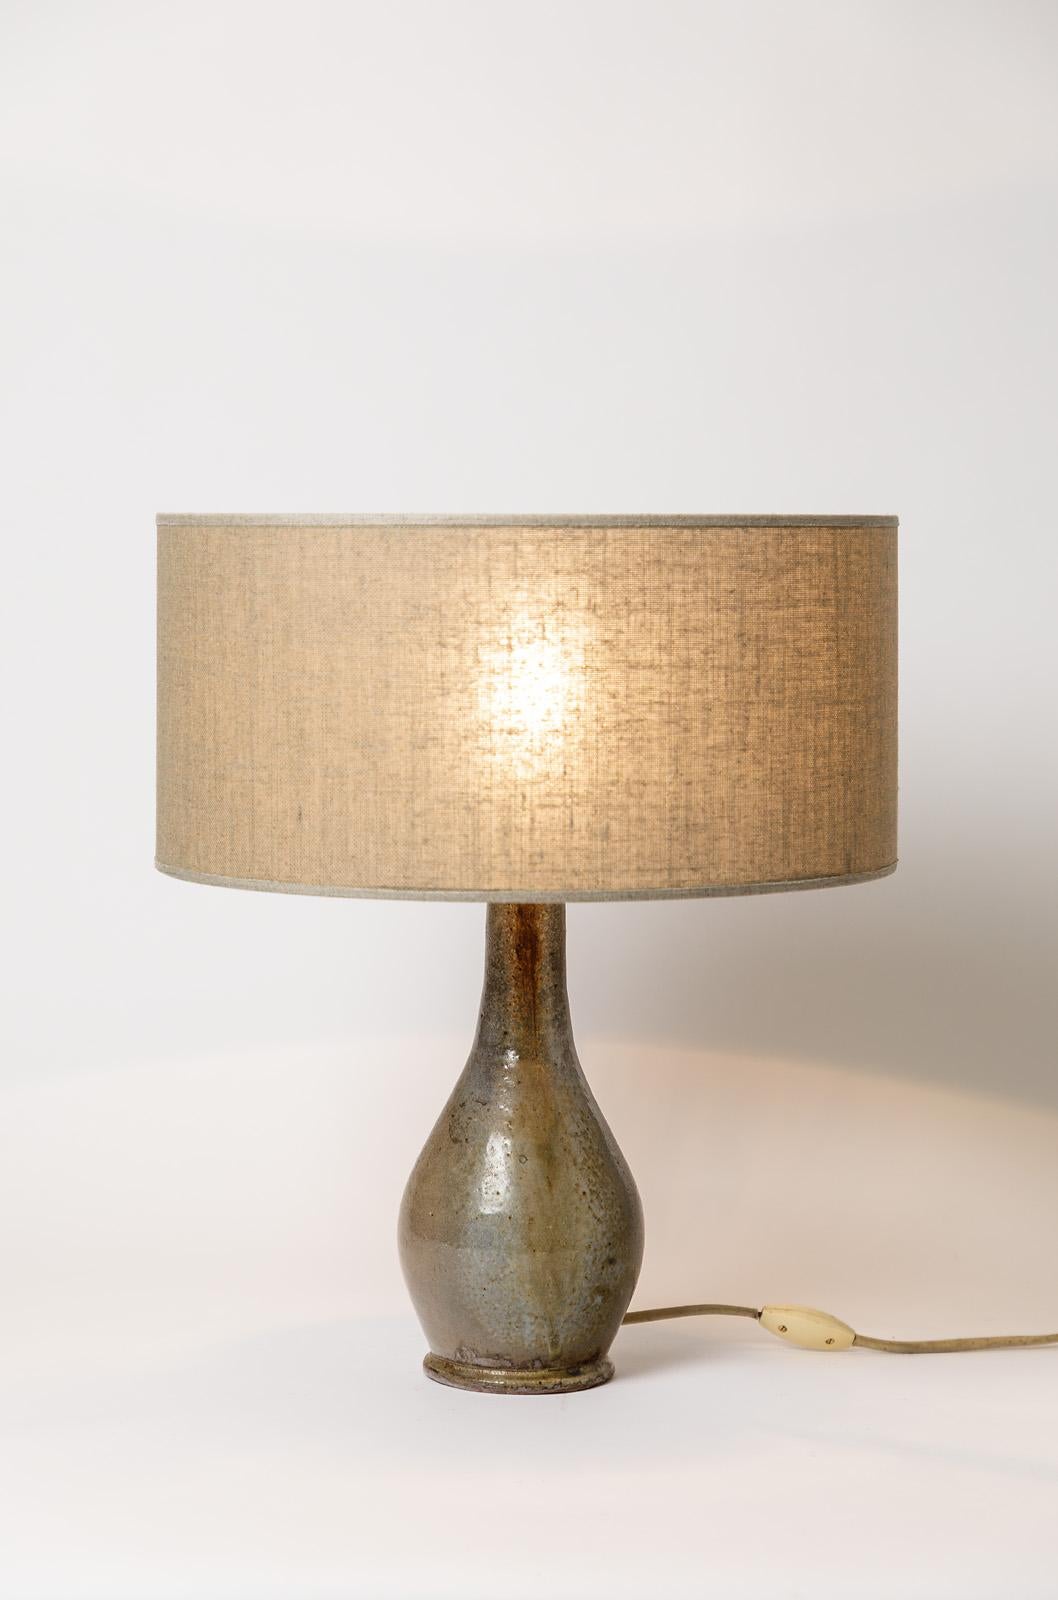 Stoneware Art Deco Ceramic Table Lamp by P. Demeure Grey Pottery Color In Excellent Condition For Sale In Neuilly-en- sancerre, FR